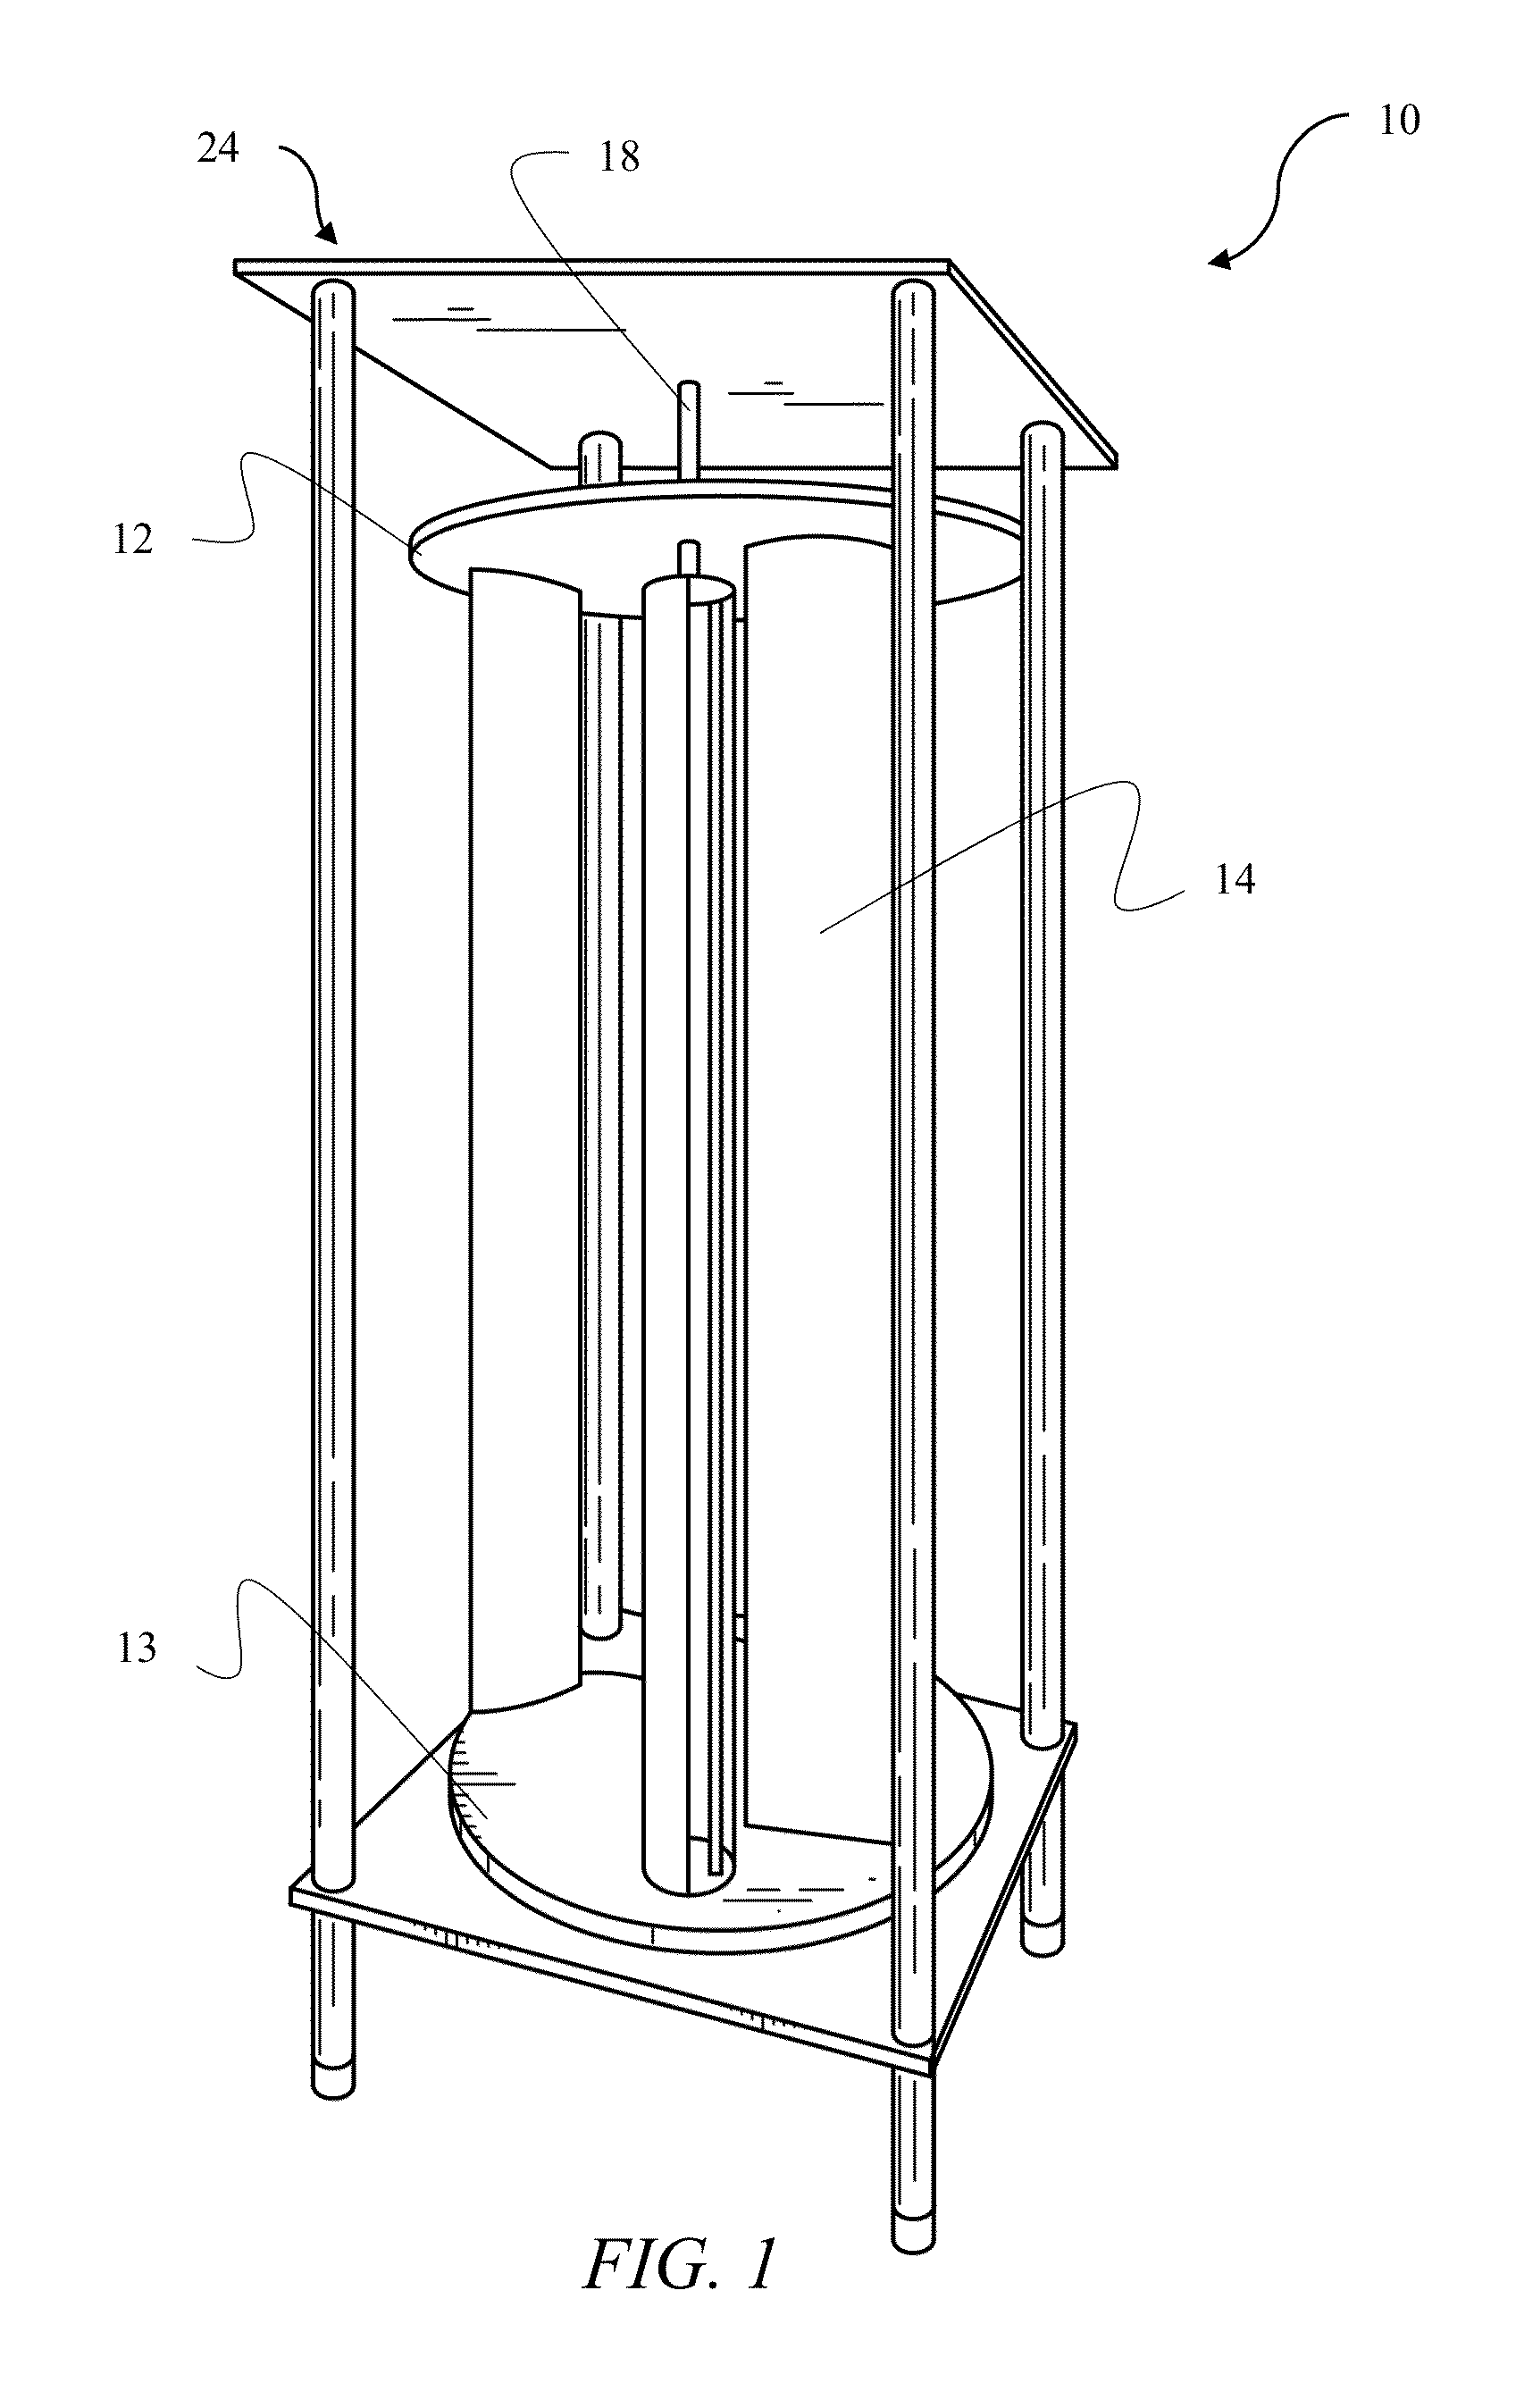 Vertical axis wind turbine with cambered airfoil blades